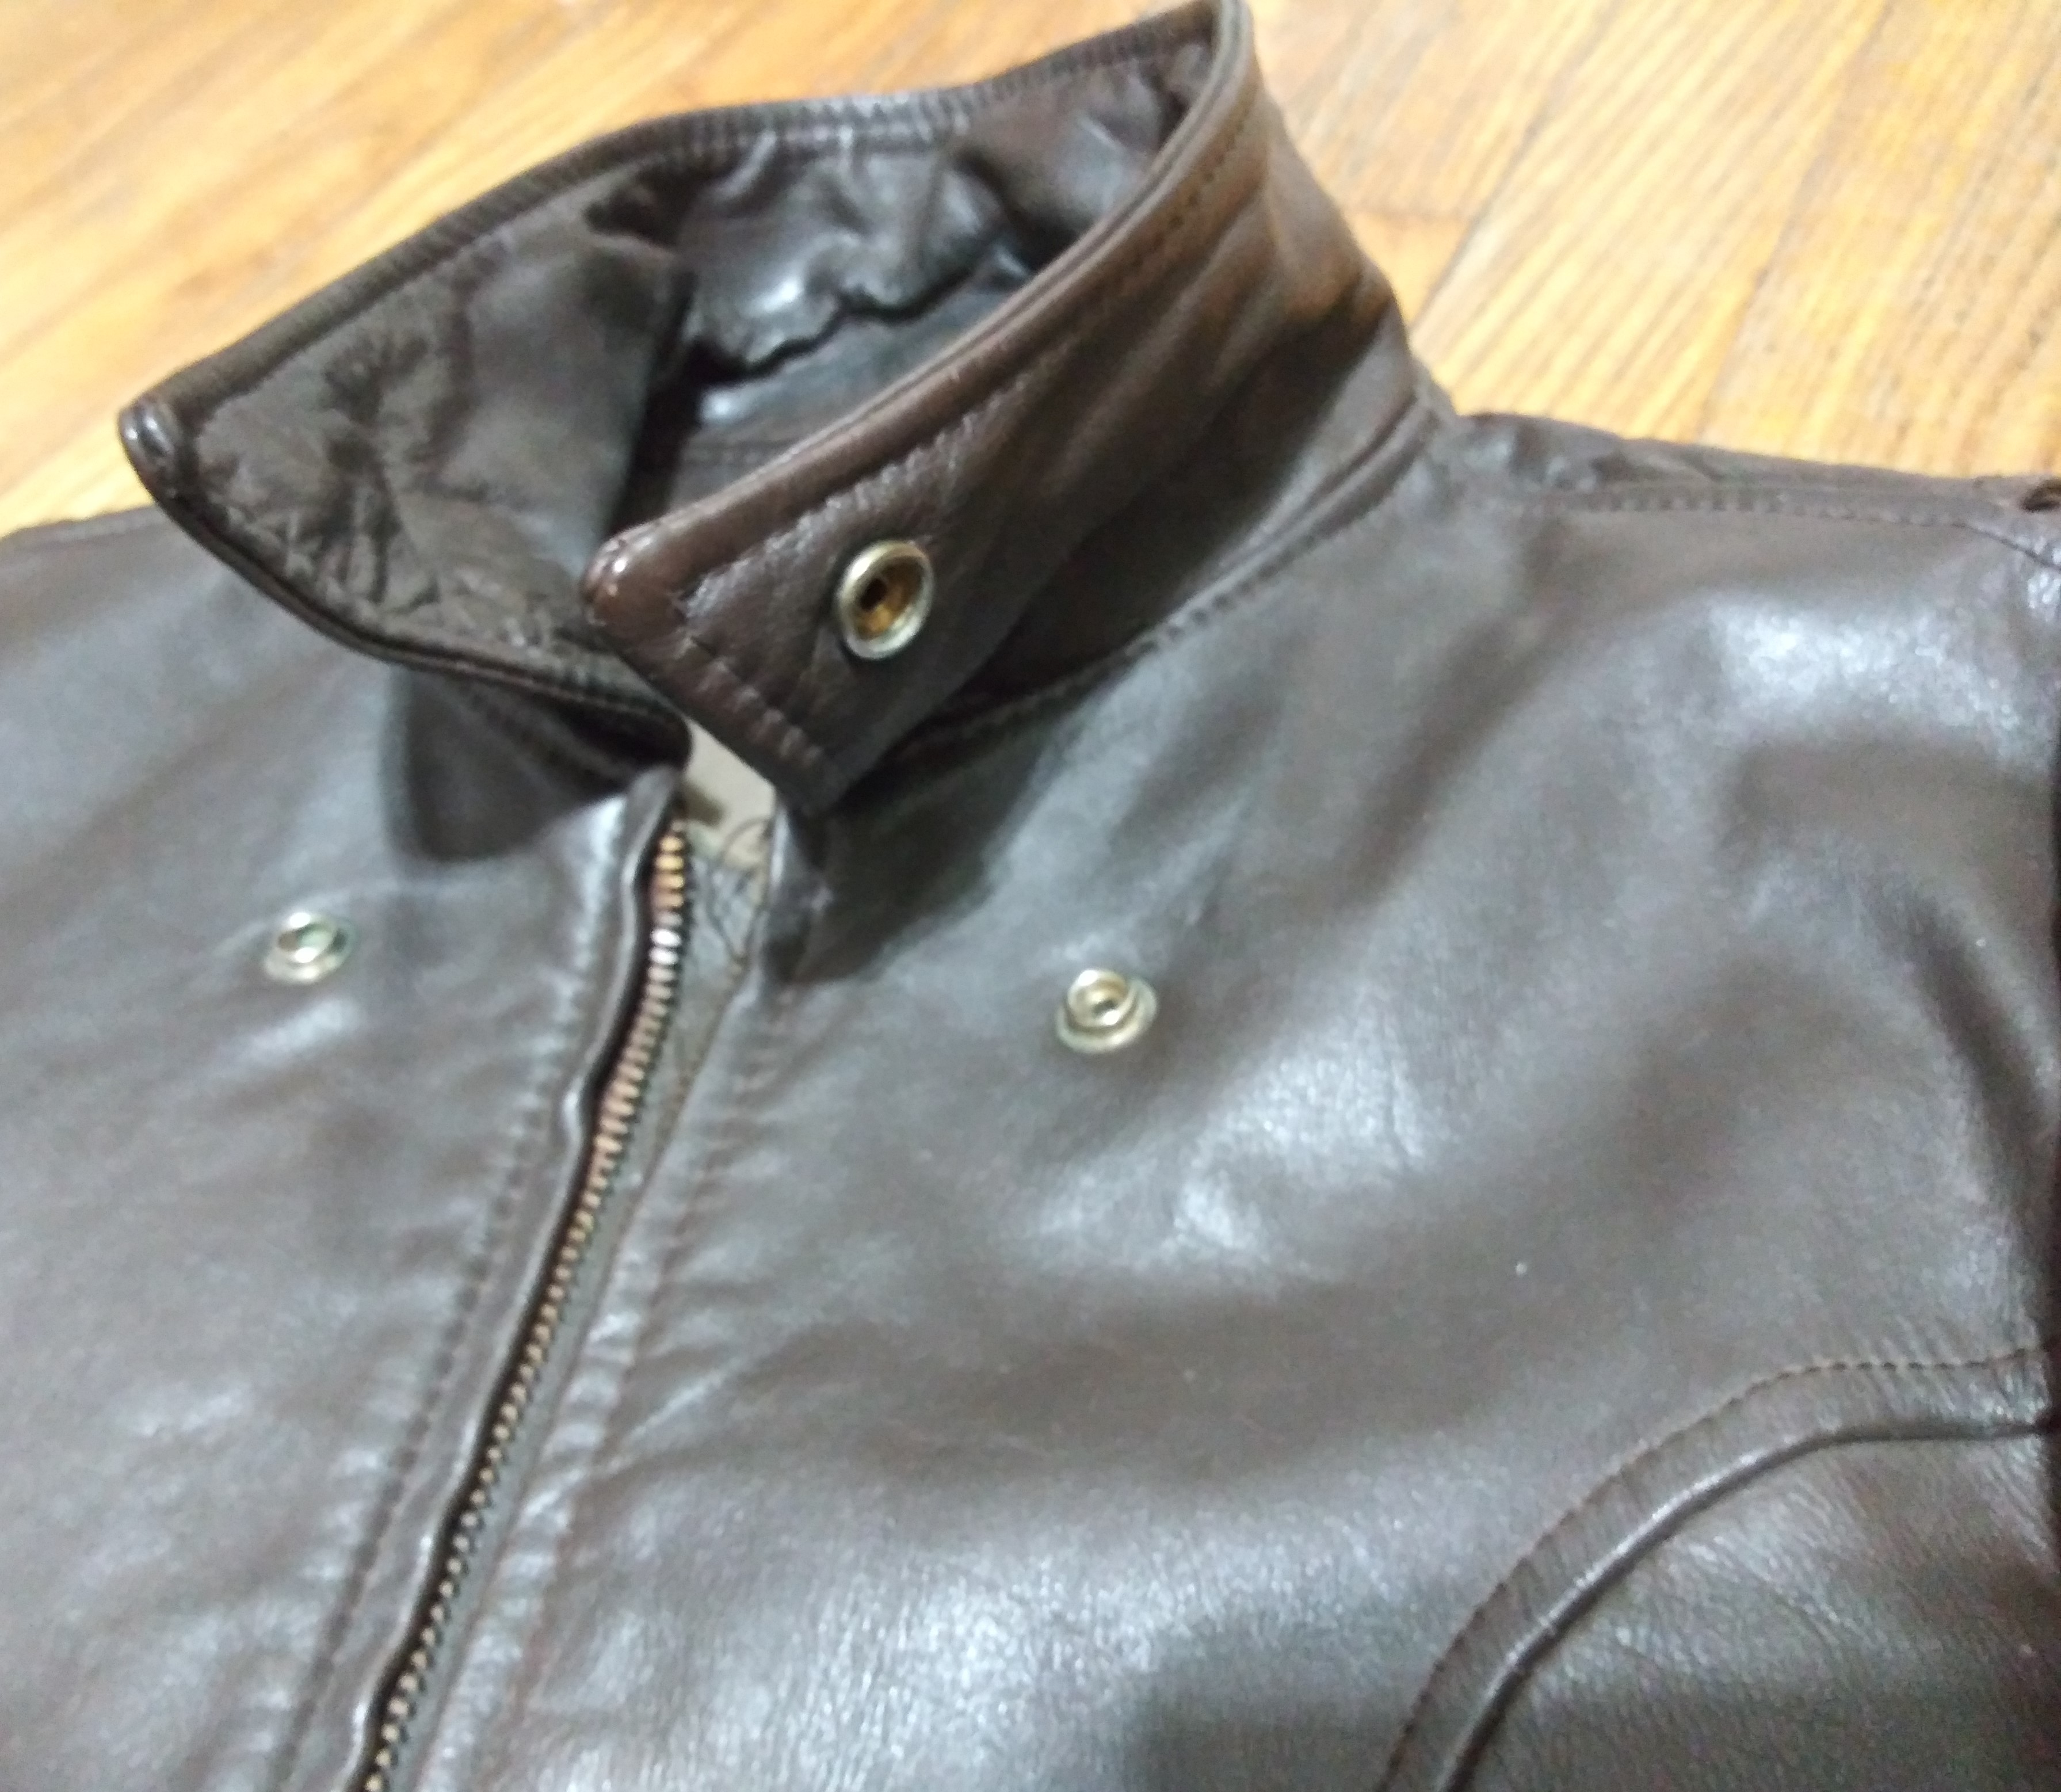 Talon zippers on a Chinese-made jacket? Can you help me ID this